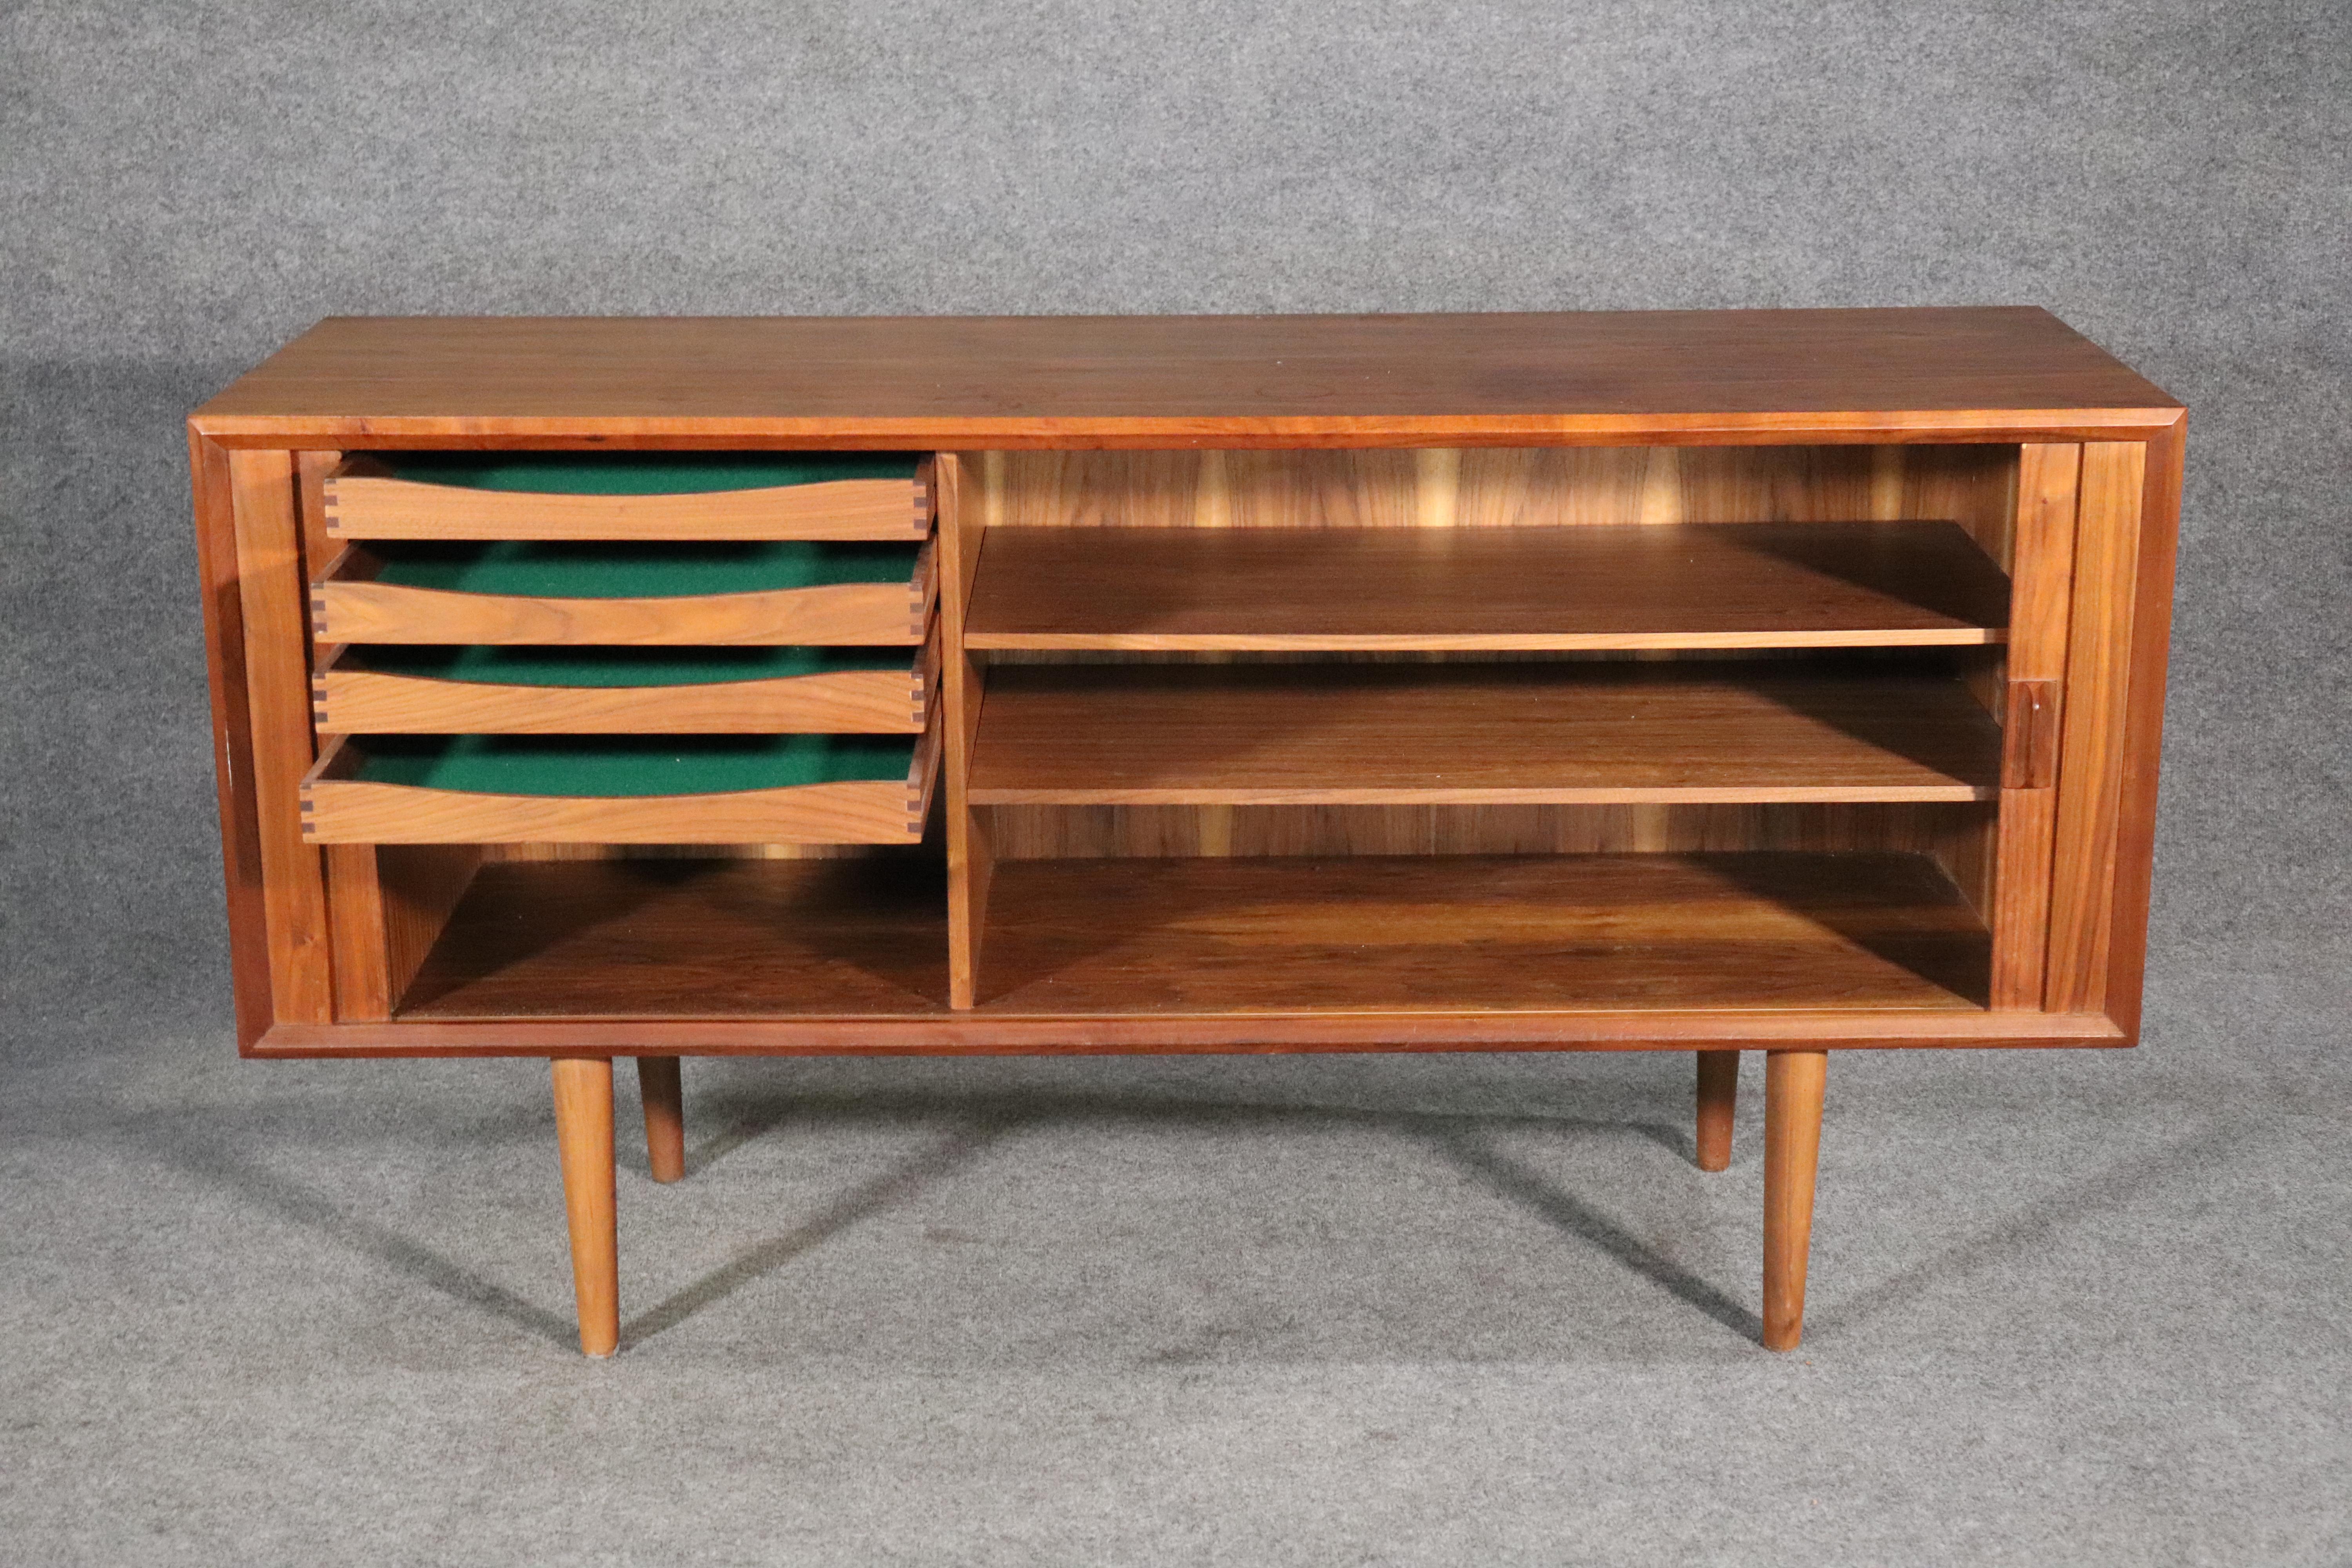 Danish mid-century modern sideboard designed by Svend Larsen. Beautiful use of teak grain, with a finished back, tambour doors, and ample storage for living or dining room.
Please confirm location NY or NJ